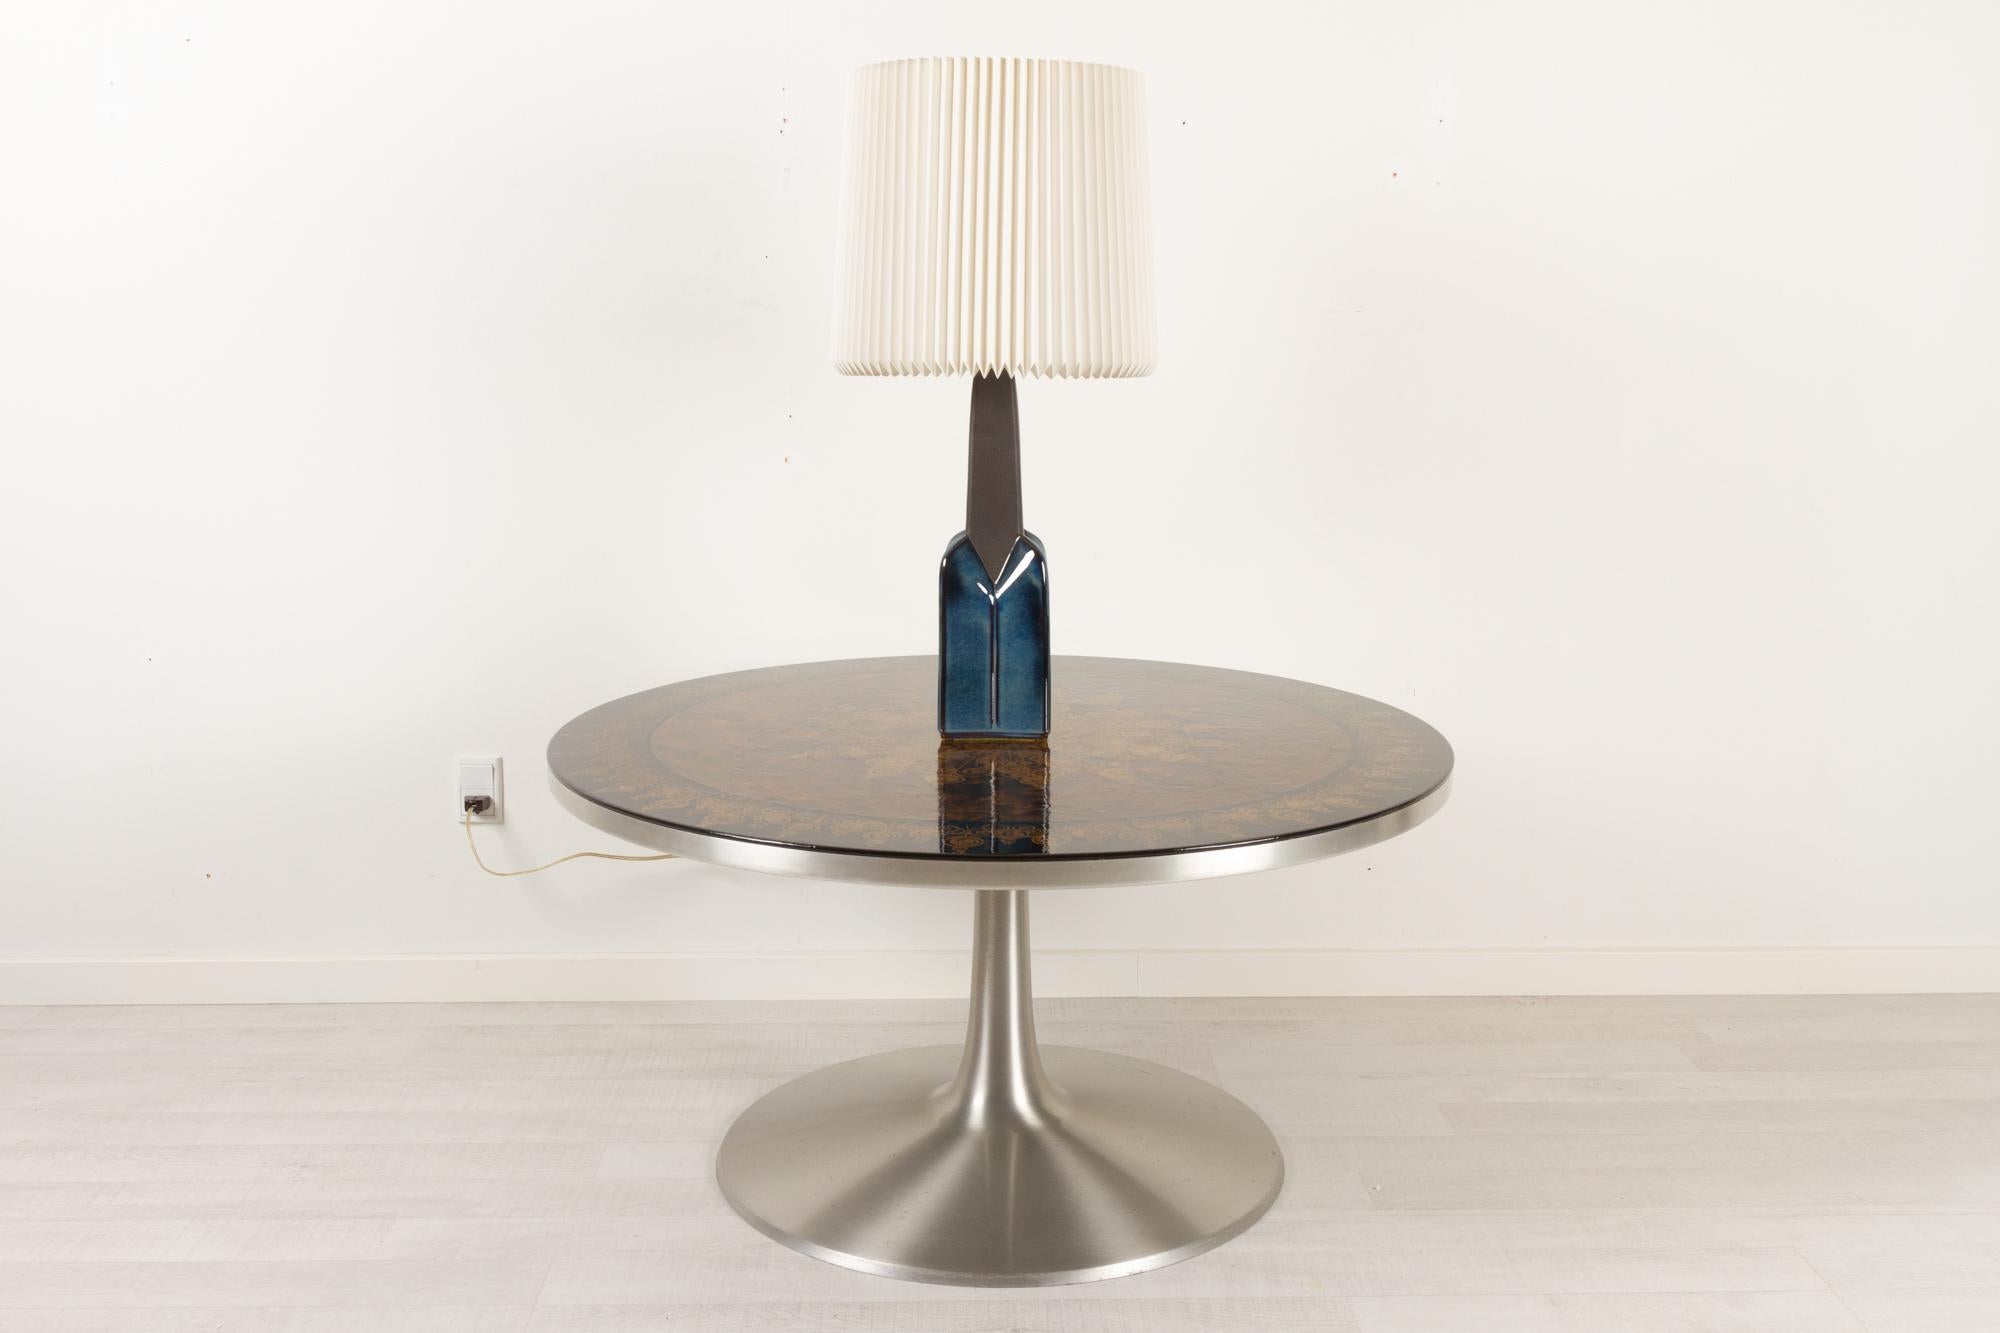 Danish Modern tall ceramic table lamp by Einar Johansen for Søholm 1960s.
This stunning table lamp is made of stoneware with a ceramic glaze in dark blue. It comes with a white hand-pleated lampshade from Le Klint. 
Model 1029.
E26/27